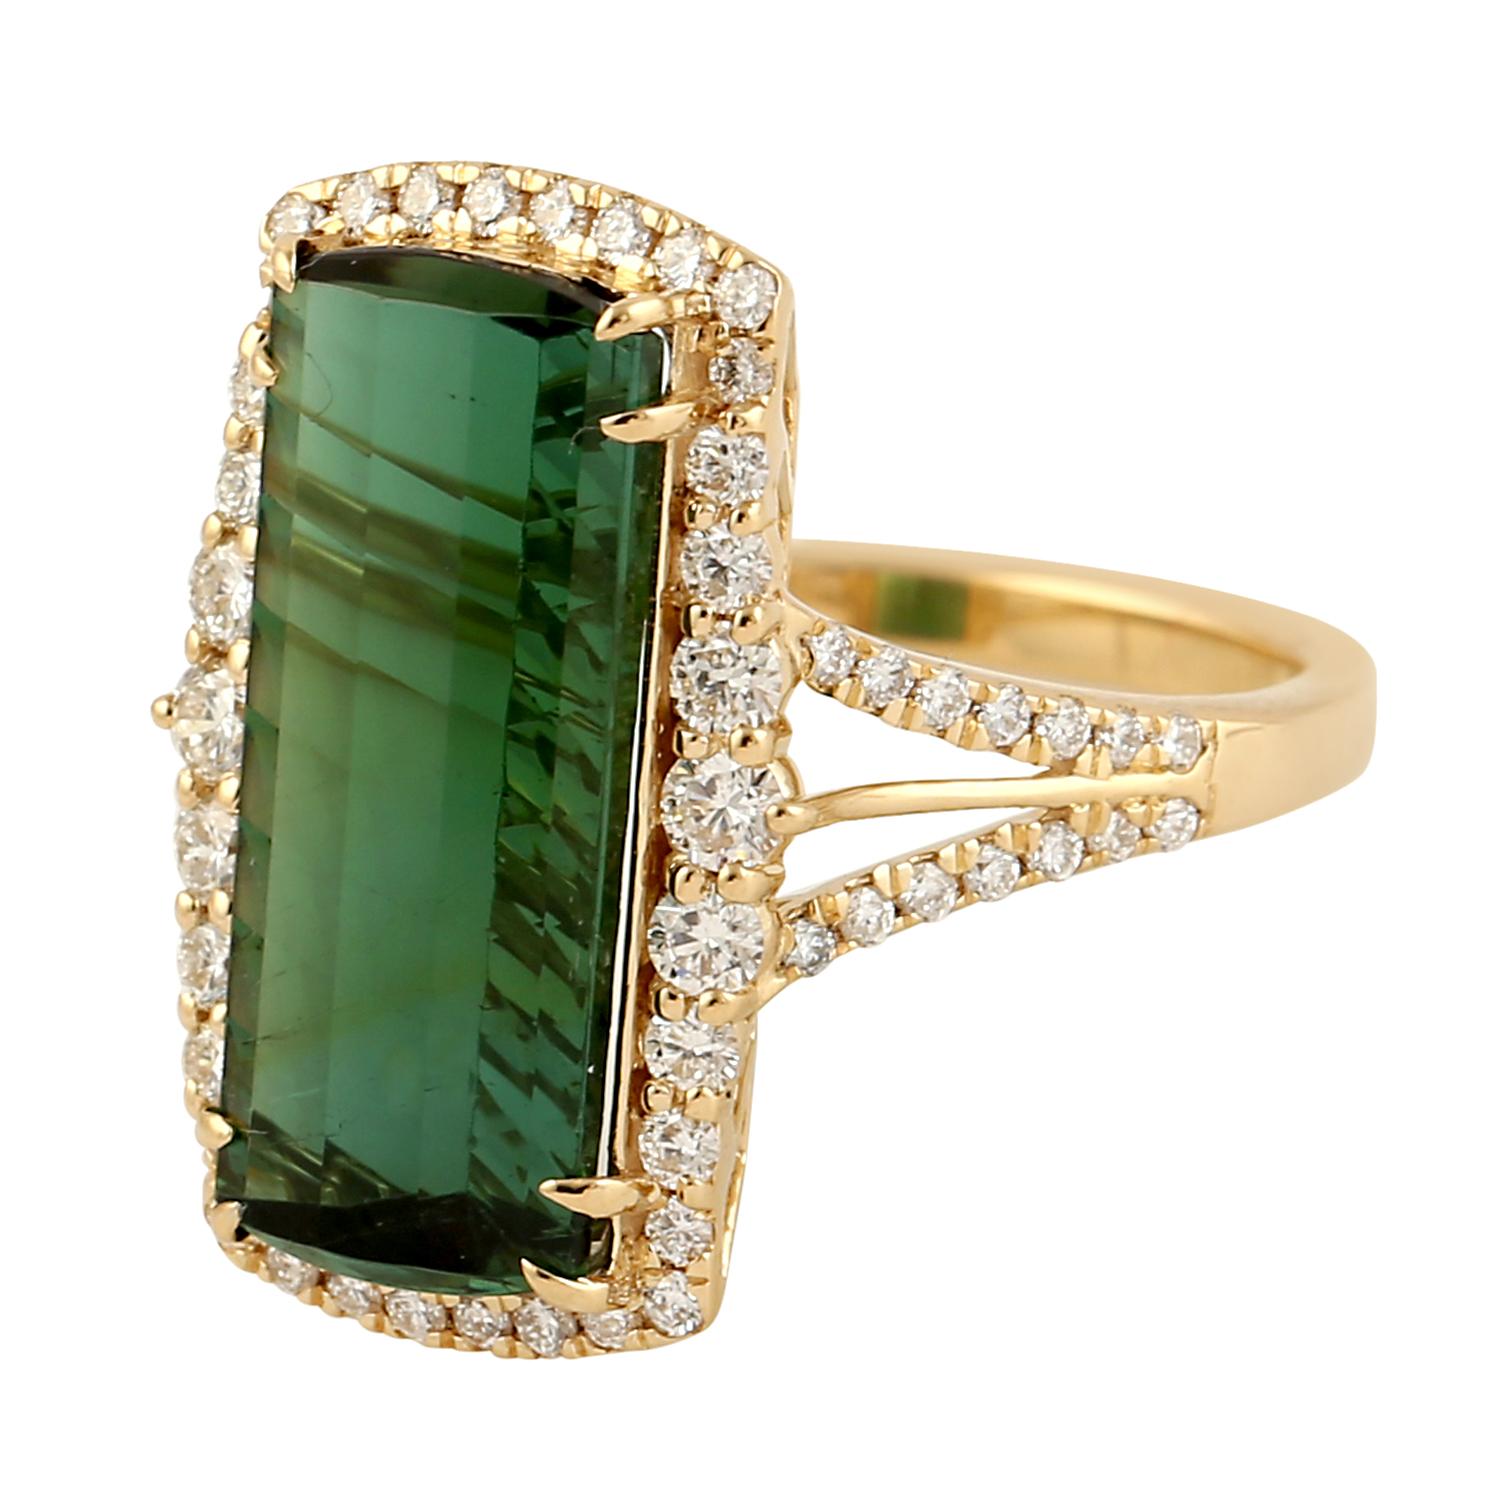 Women's Green Tourmaline Cocktail Ring With Pave Diamonds Made In 18k yellow Gold For Sale